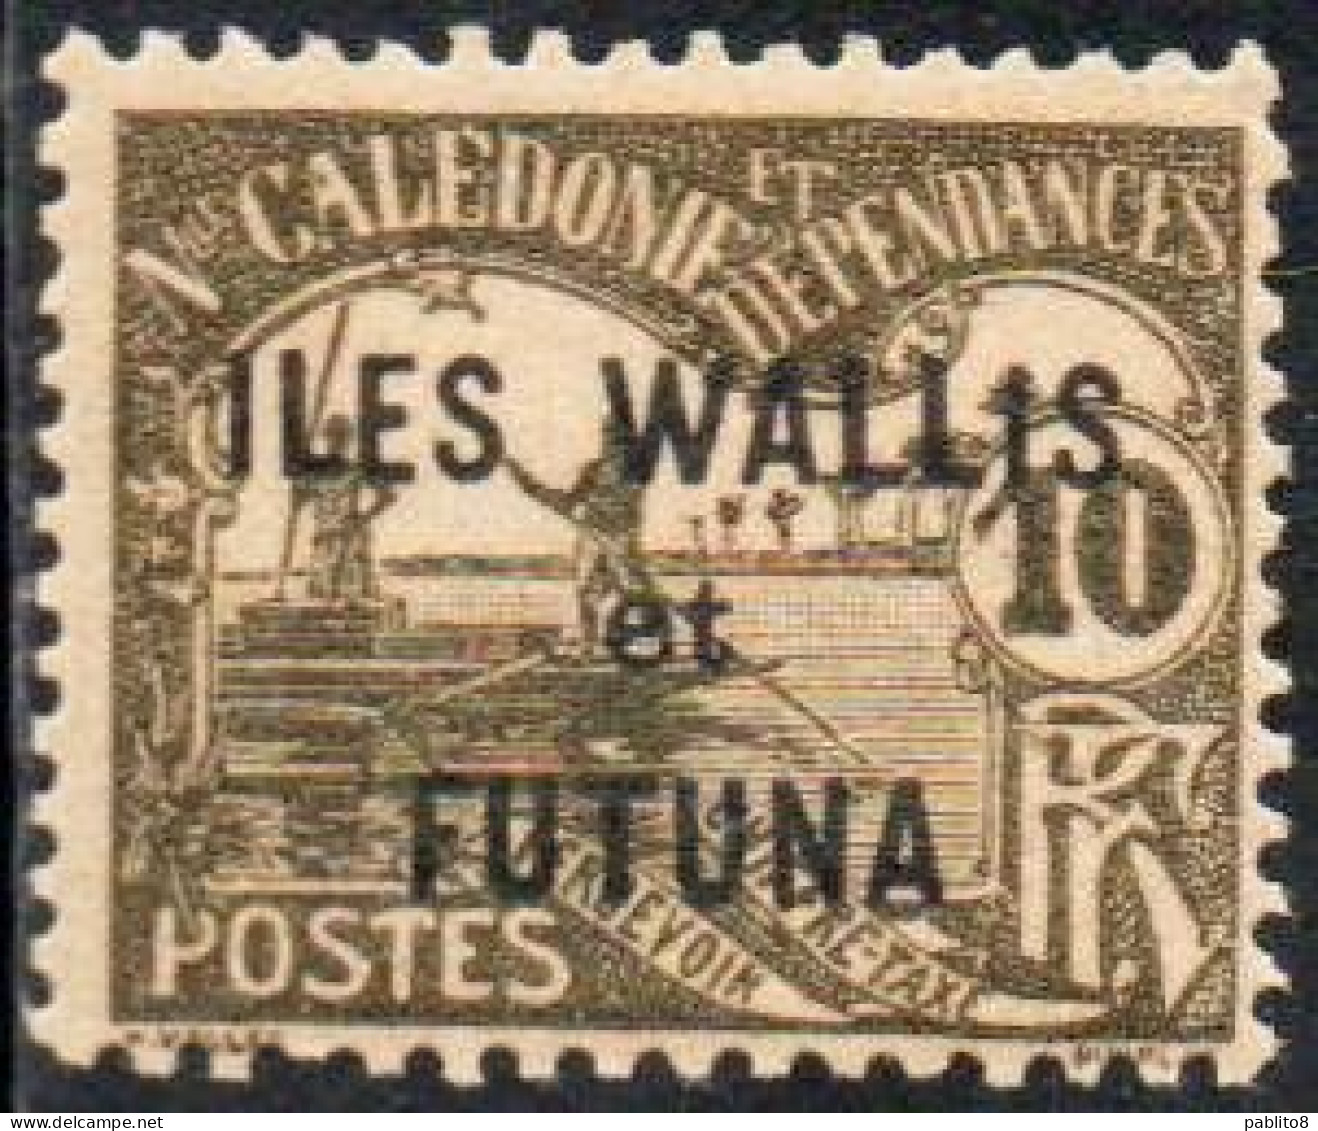 WALLIS AND FUTUNA ISLANDS 1920 POSTAGE DUE STAMPS TAXE SEGNATASSE MEN POLING BOAT NEW CALEDONIA OVERPRINTED 10c MNH - Postage Due